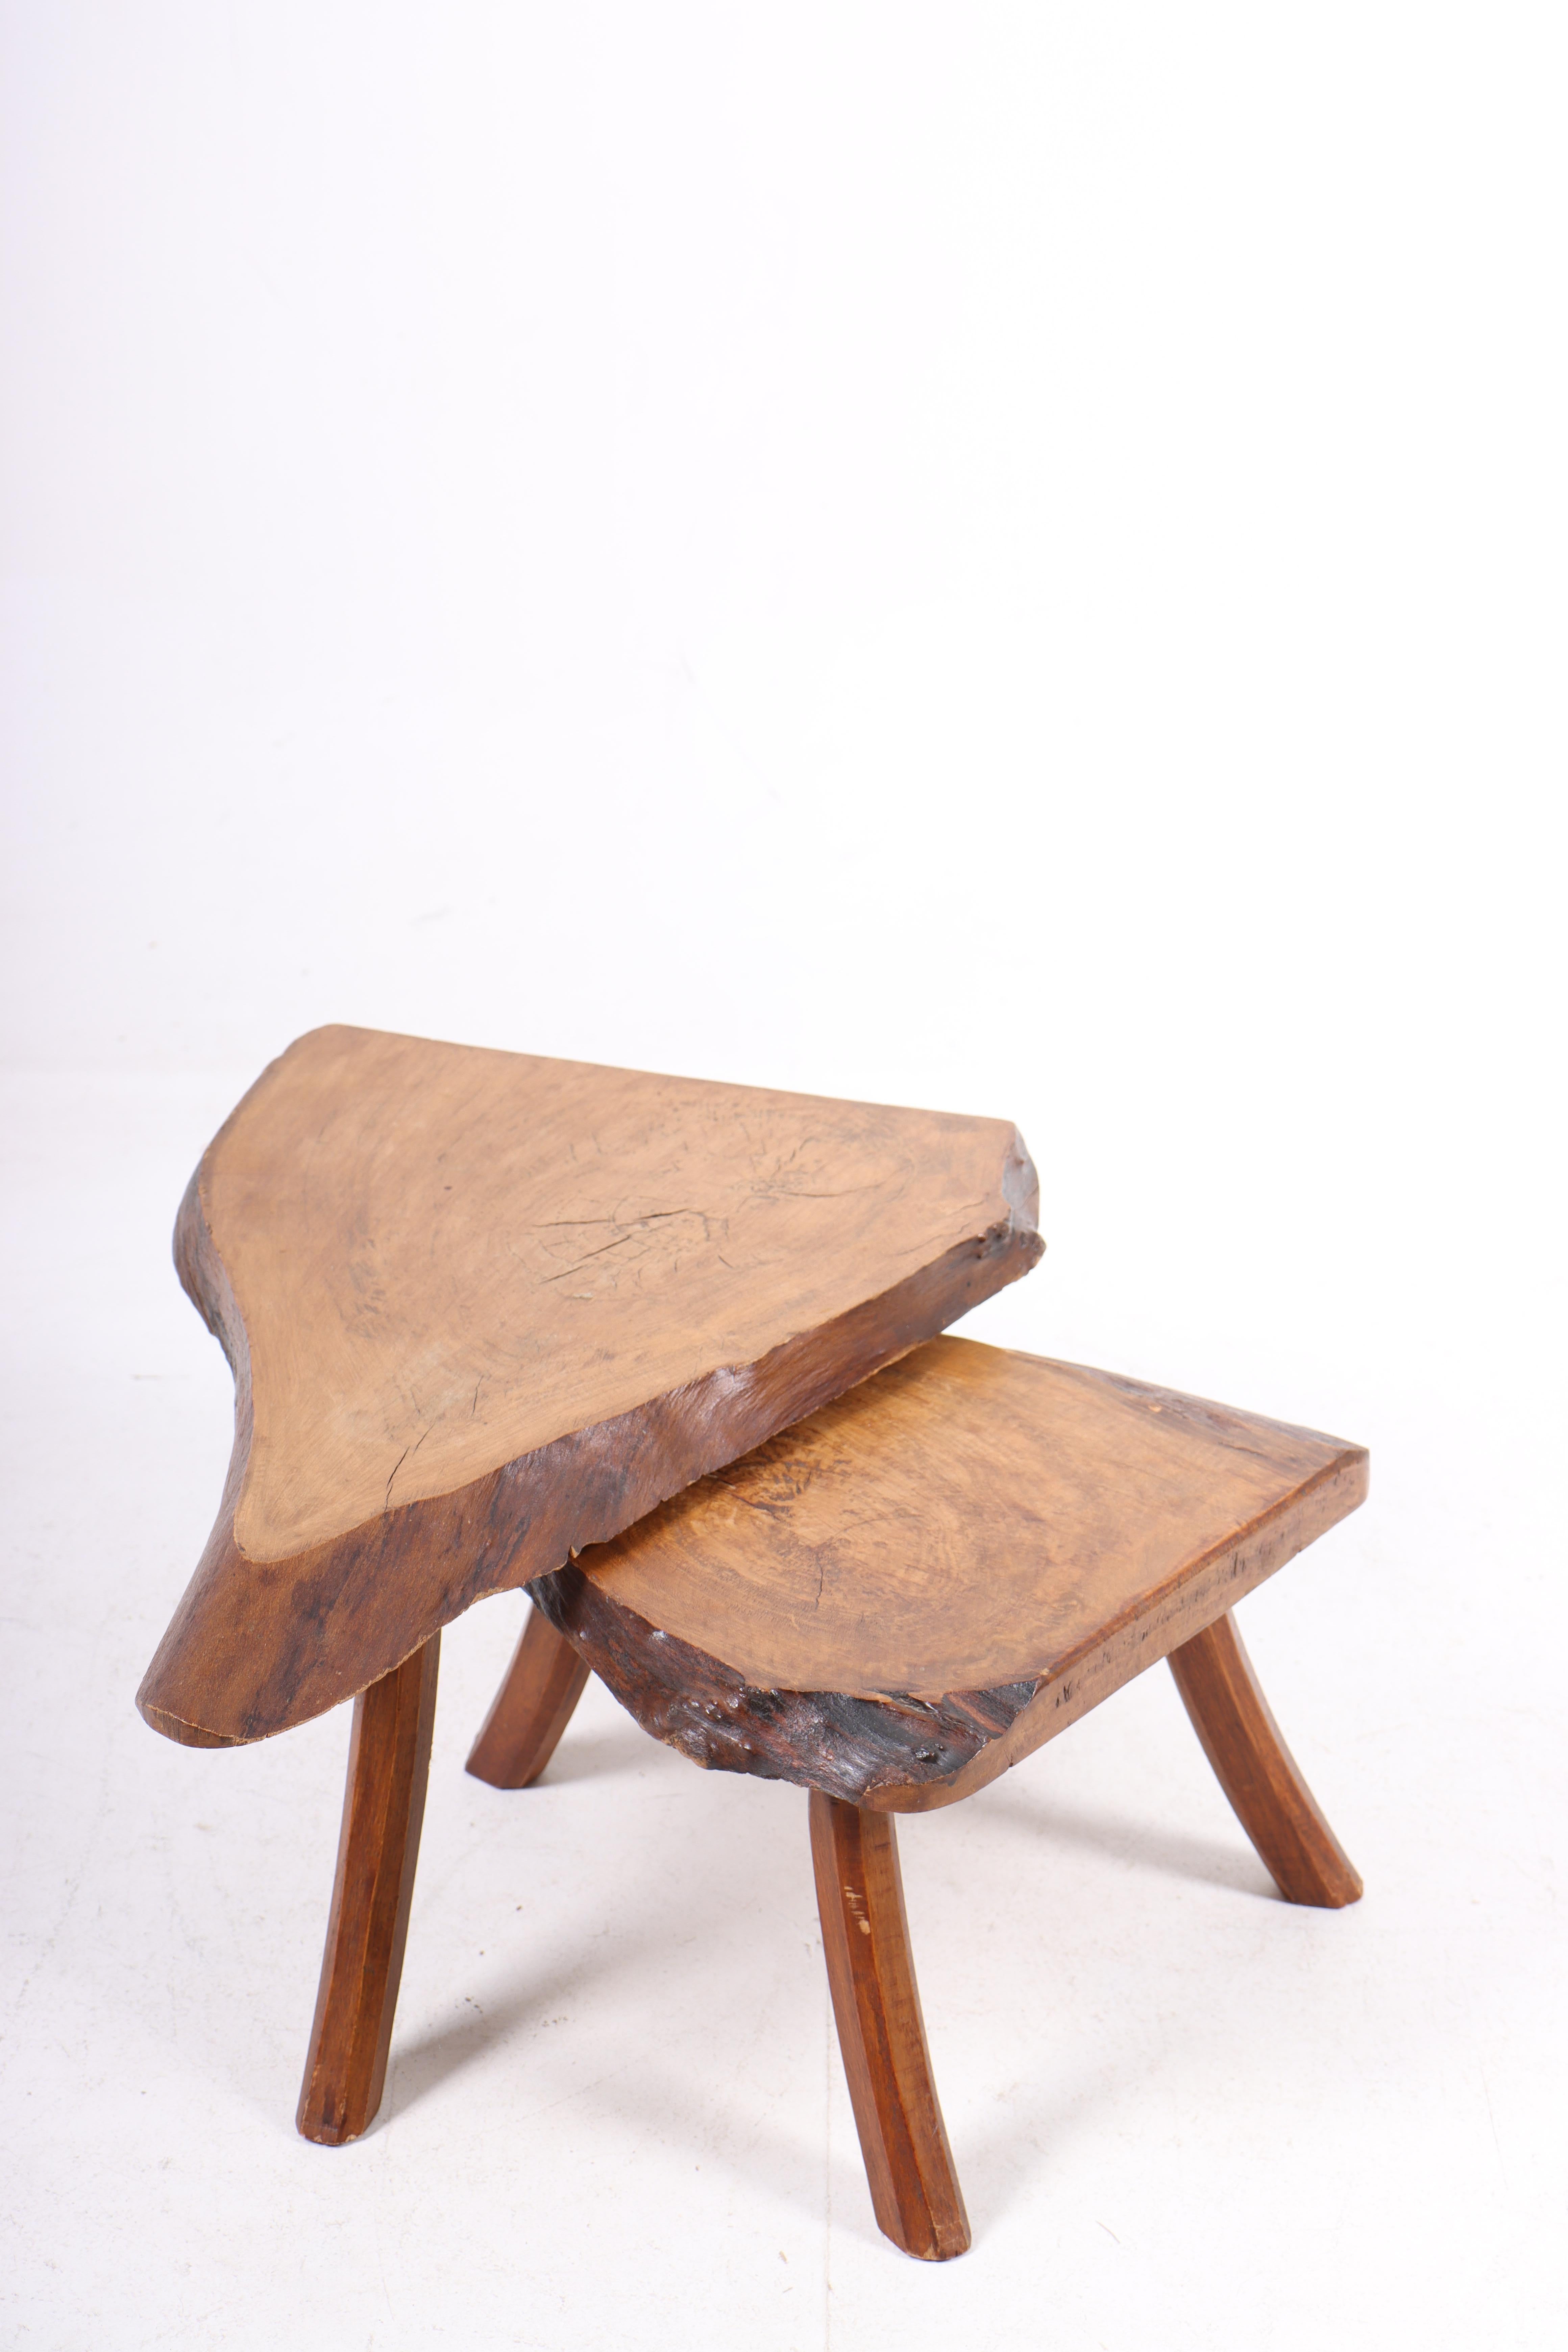 Mid-20th Century Pair of Mid-Century Side Tables in Walnut by, Danish Design, 1960s